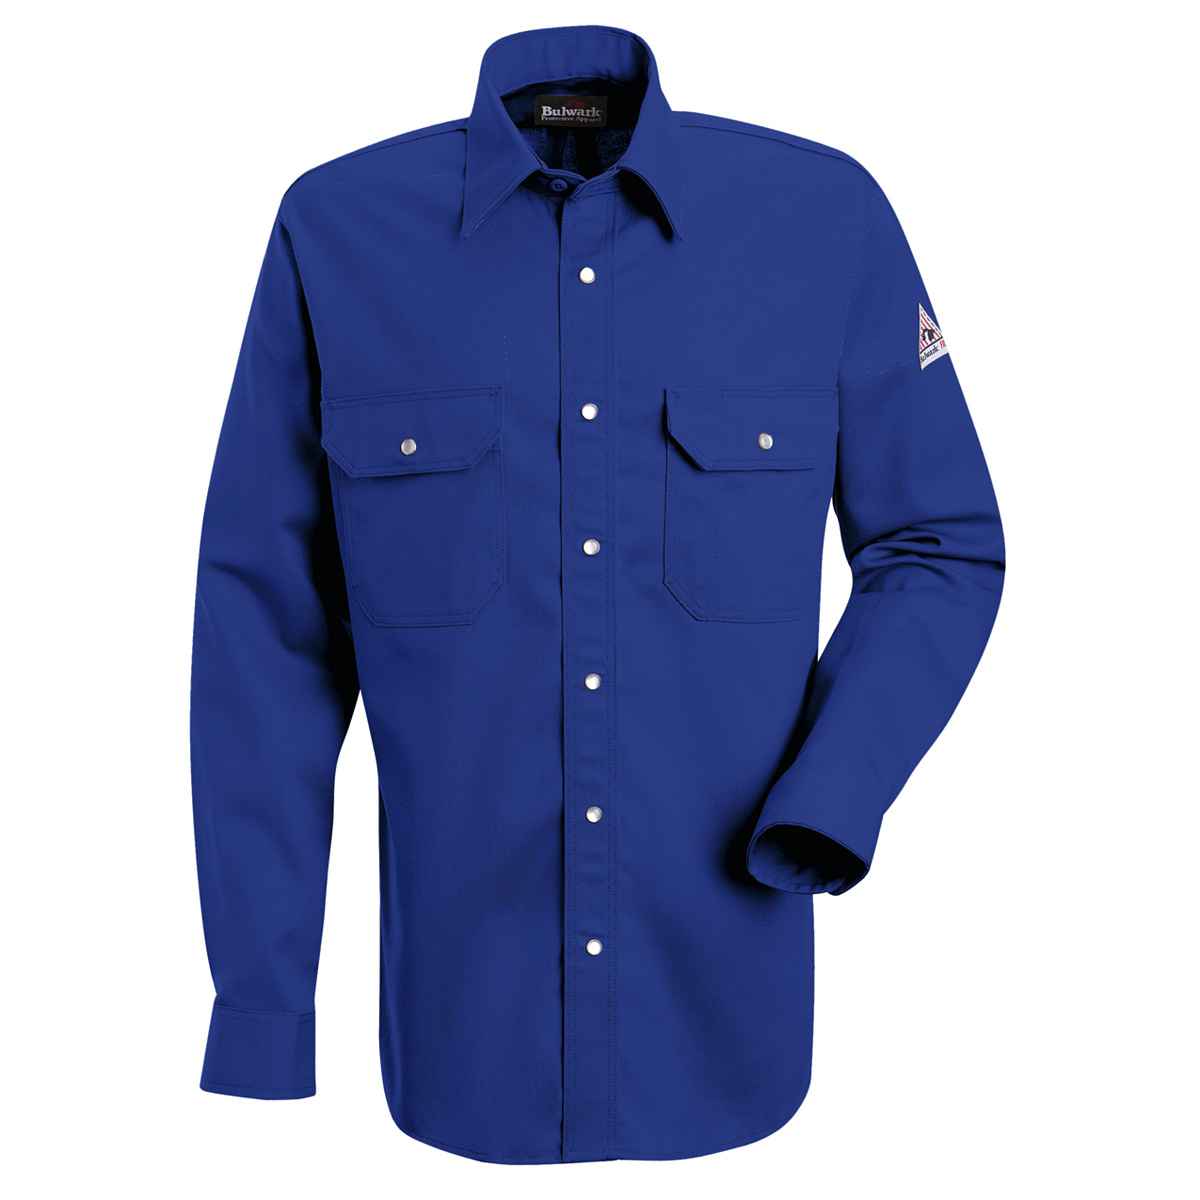 Bulwark® X-Large Tall Royal Blue EXCEL FR® Cotton Flame Resistant Uniform Shirt With Snap Front Closure